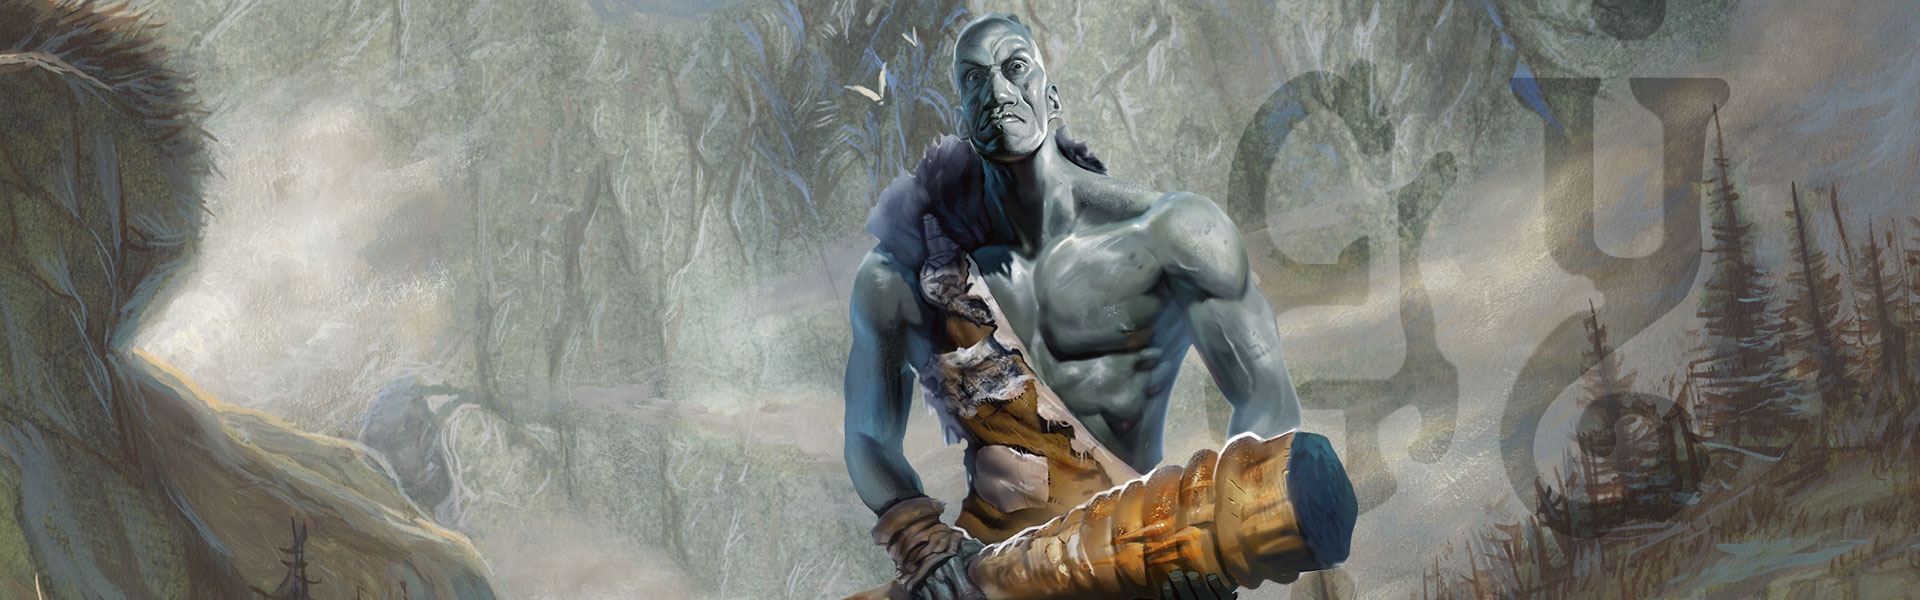 Stone_Giant_Subsection_Hero_Image